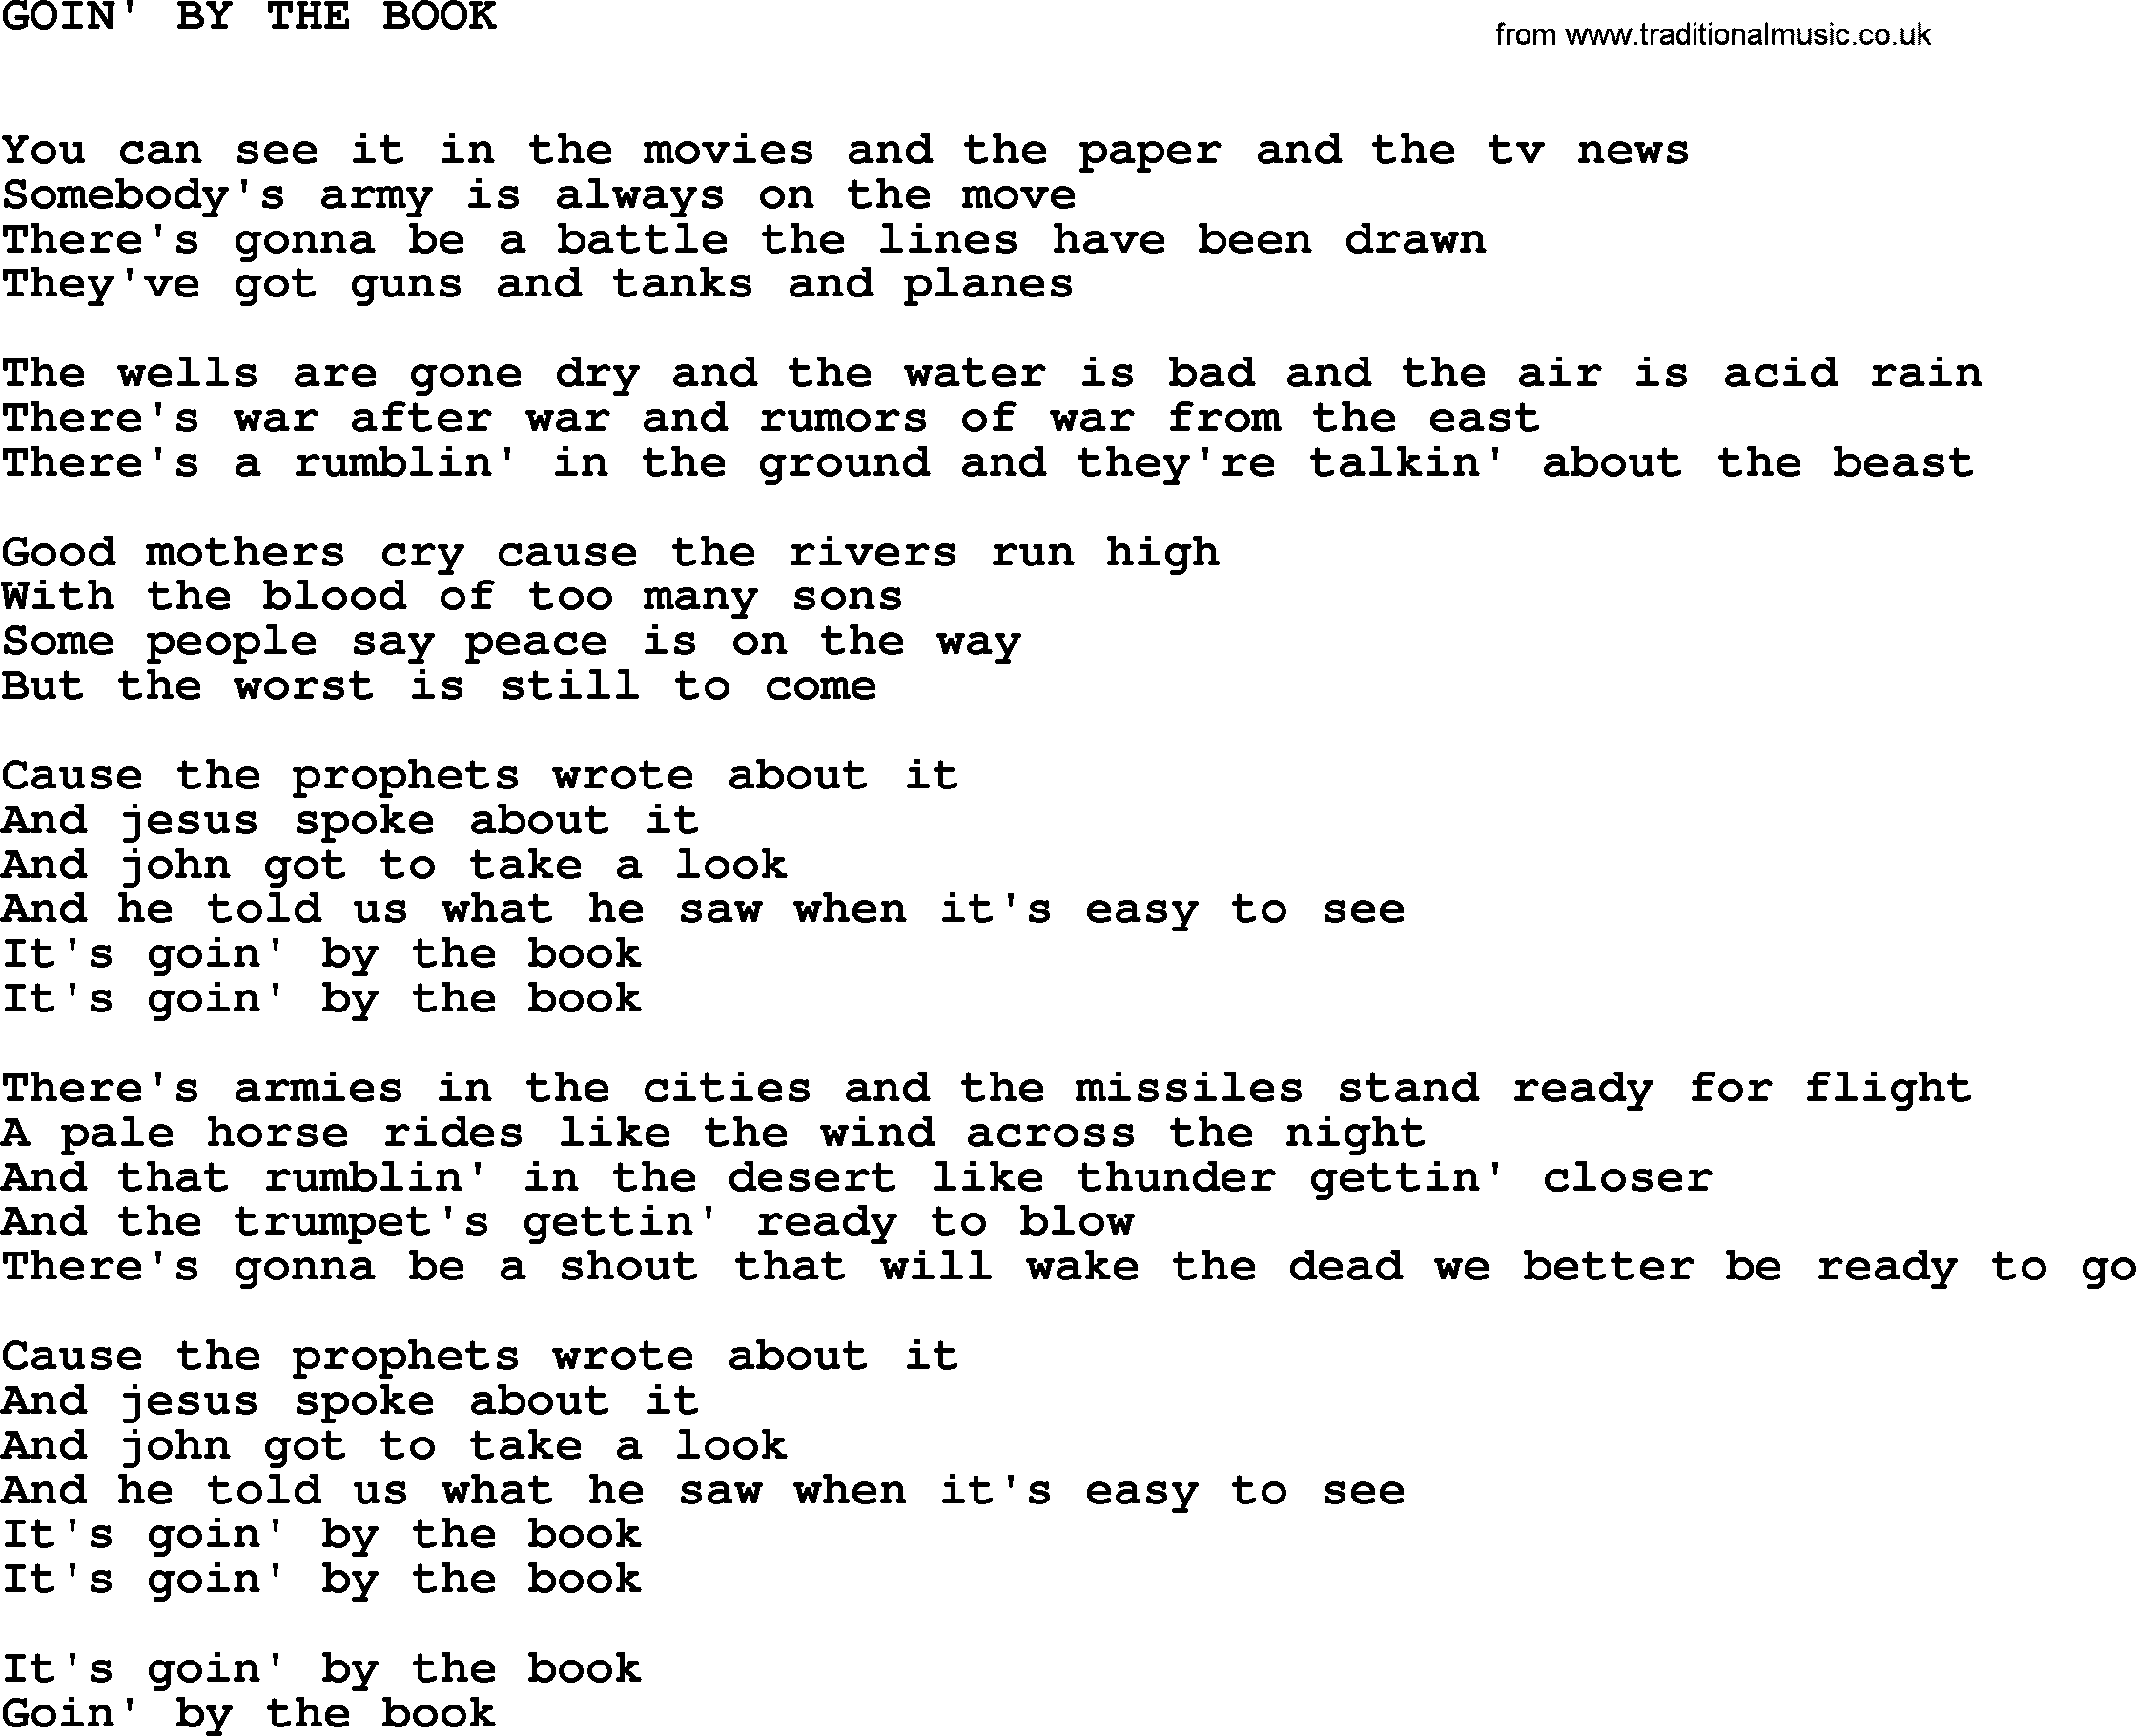 Johnny Cash song Goin' By The Book.txt lyrics